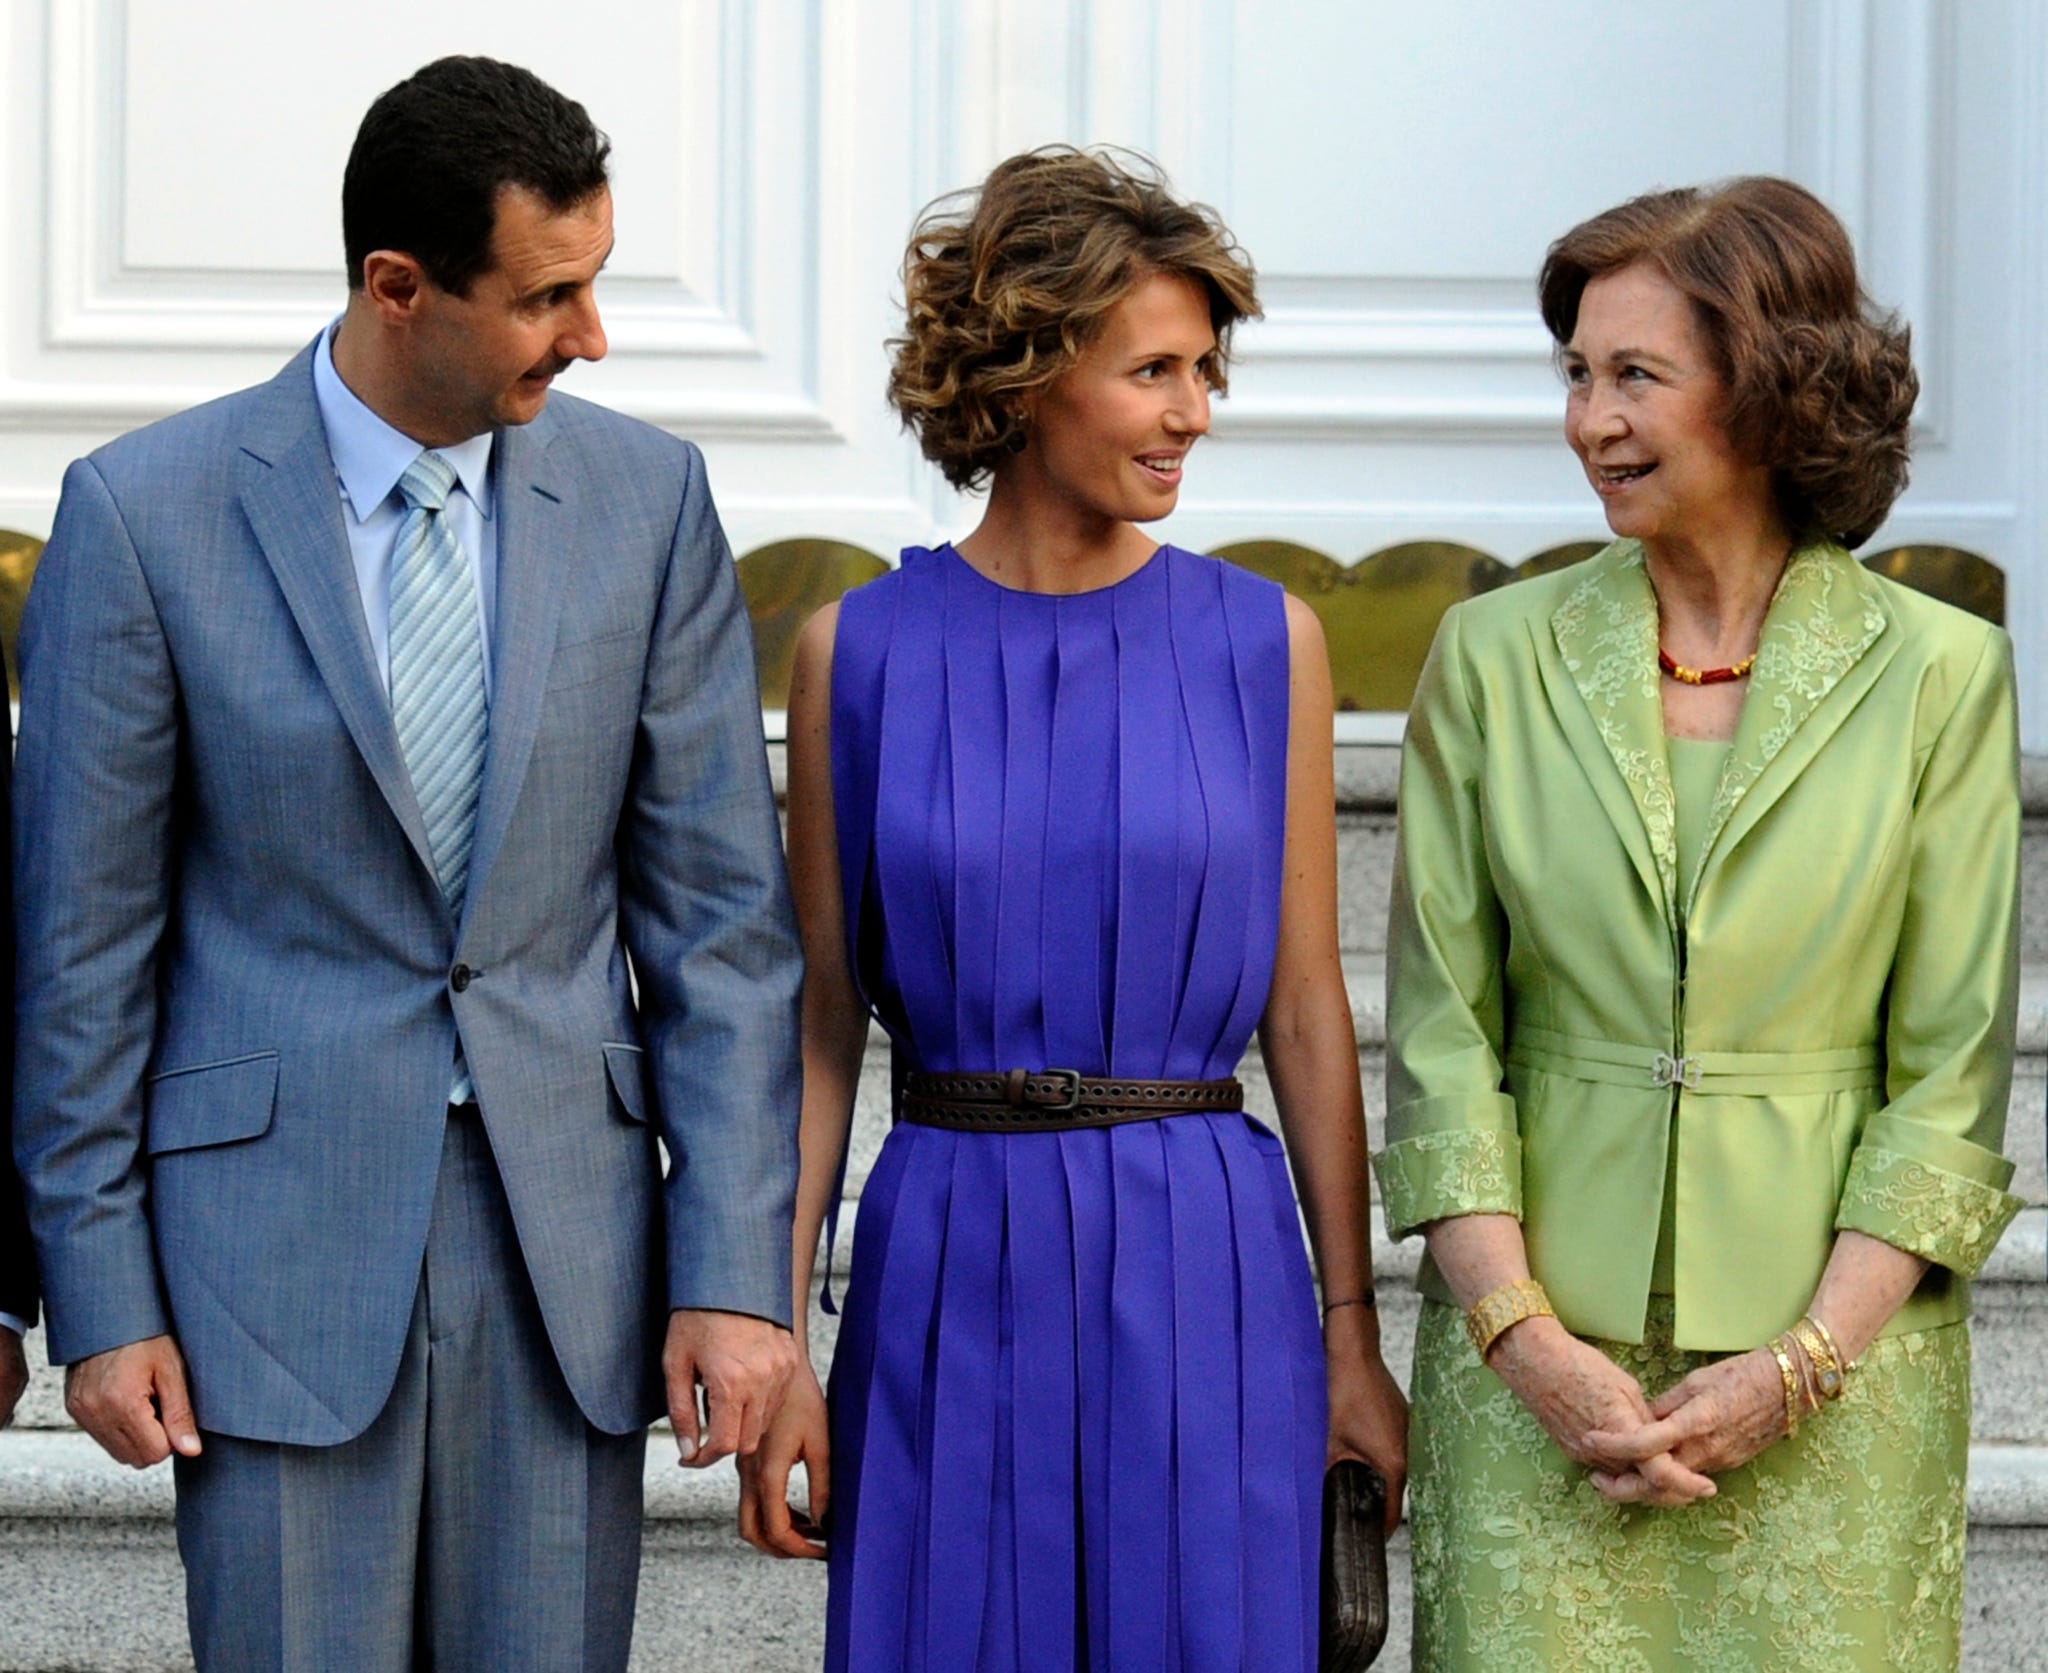 syrian president bashar al assad l and his wife asma c speak with spanish queen sofia before a dinner at zarzuela palace in madrid on july 4, 2010 al assad arrived in spain on july 4 for a two day official visit that follows a tour of latin america   afp photo  dominique faget photo credit should read dominique fagetafp via getty images